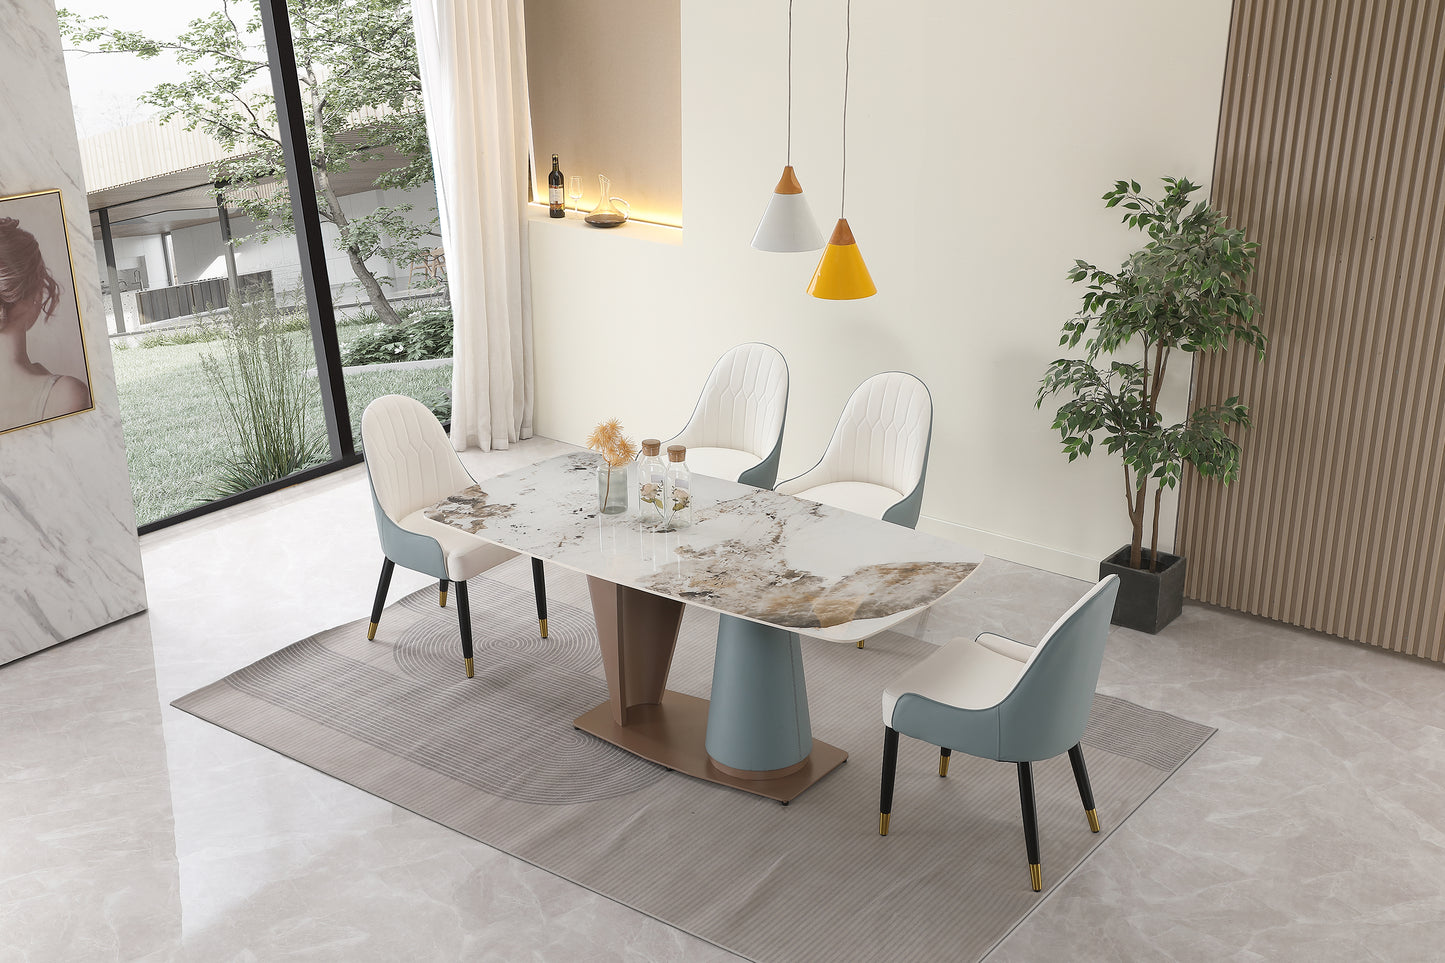 Pandora color sintered stone dining table